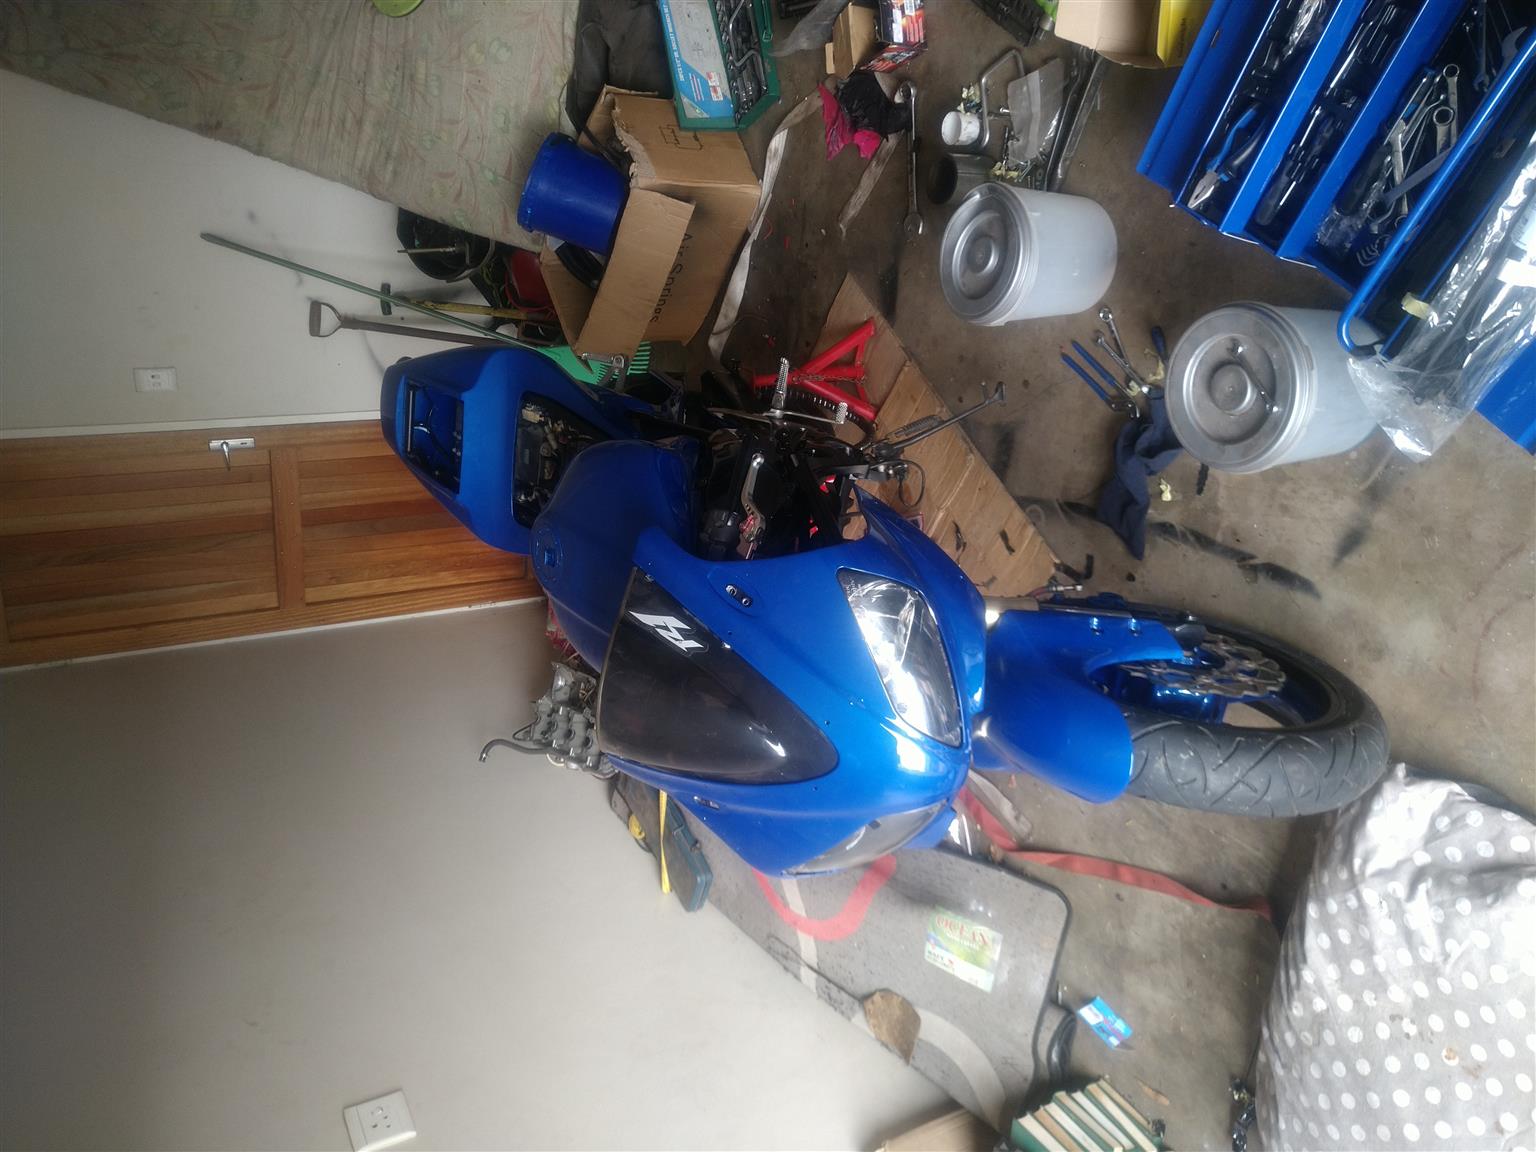 Yamaha R1 for sale its a 2000 model 